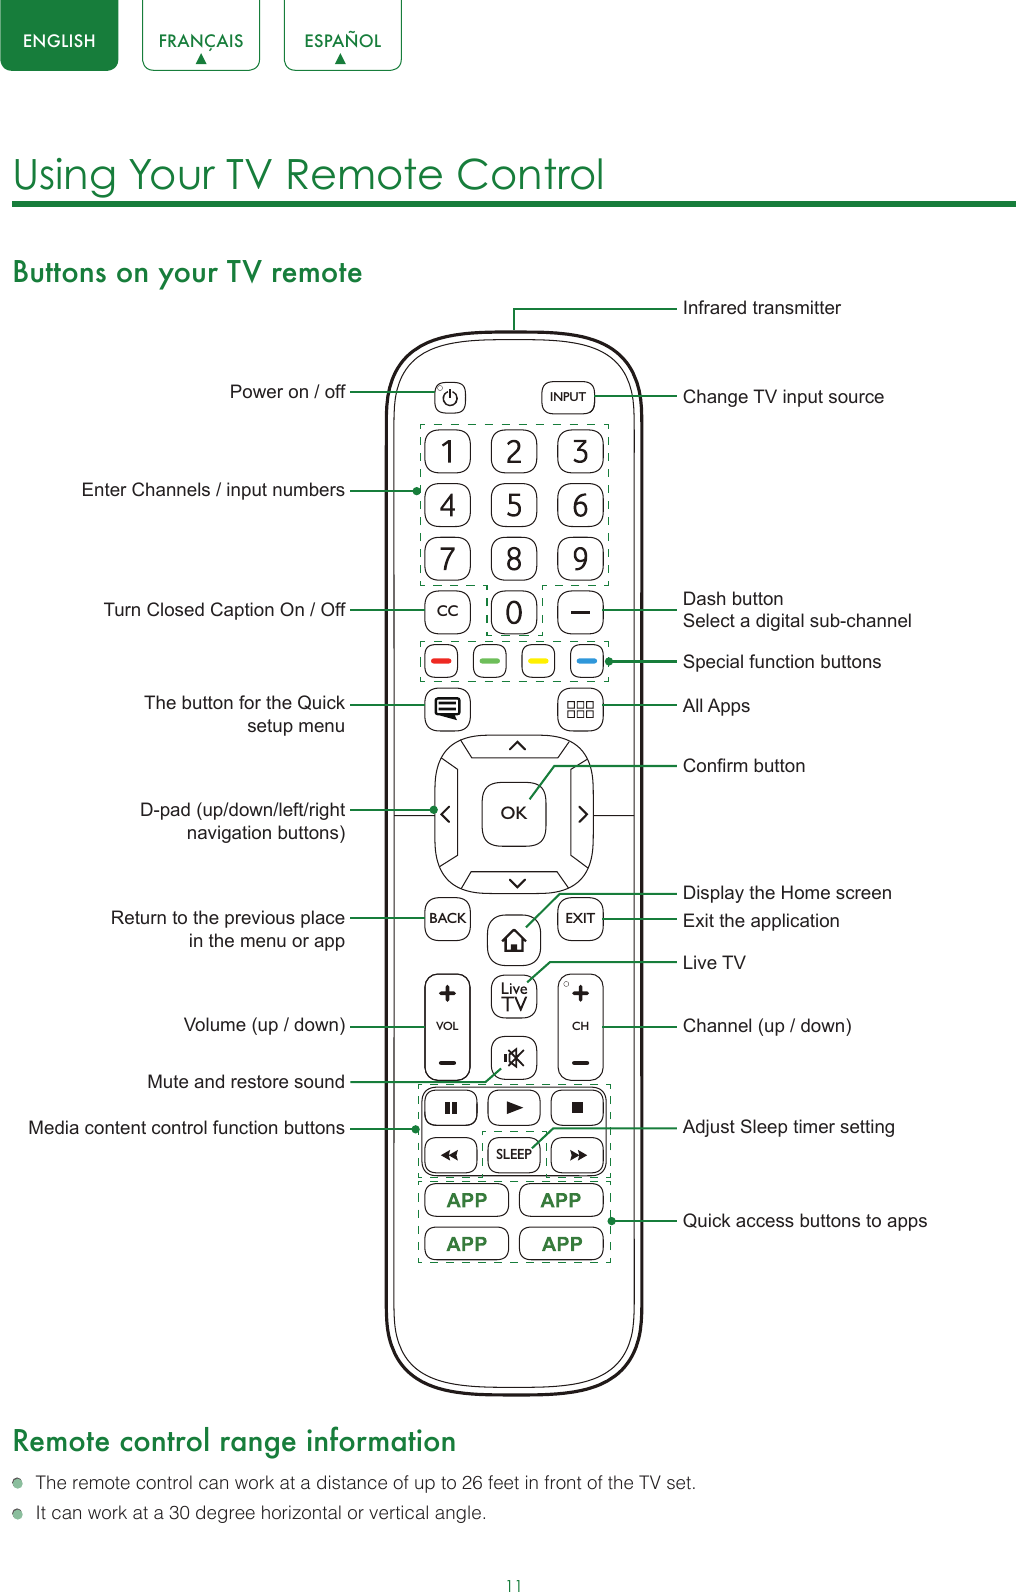 11ENGLISH FRANÇAIS ESPAÑOLUsing Your TV Remote Control Buttons on your TV remoteRemote control range information  The remote control can work at a distance of up to 26 feet in front of the TV set.  It can work at a 30 degree horizontal or vertical angle.SLEEPVOLCHOKCCBACK EXITINPUTPower on / offEnter Channels / input numbersMedia content control function buttonsDash button Select a digital sub-channelD-pad (up/down/left/right navigation buttons)Volume (up / down)Mute and restore soundAdjust Sleep timer settingThe button for the Quick setup menuReturn to the previous place in the menu or appLive TVInfrared transmitterChange TV input sourceChannel (up / down)Exit the applicationTurn Closed Caption On / OffSpecial function buttonsAll AppsDisplay the Home screenConrm buttonQuick access buttons to apps